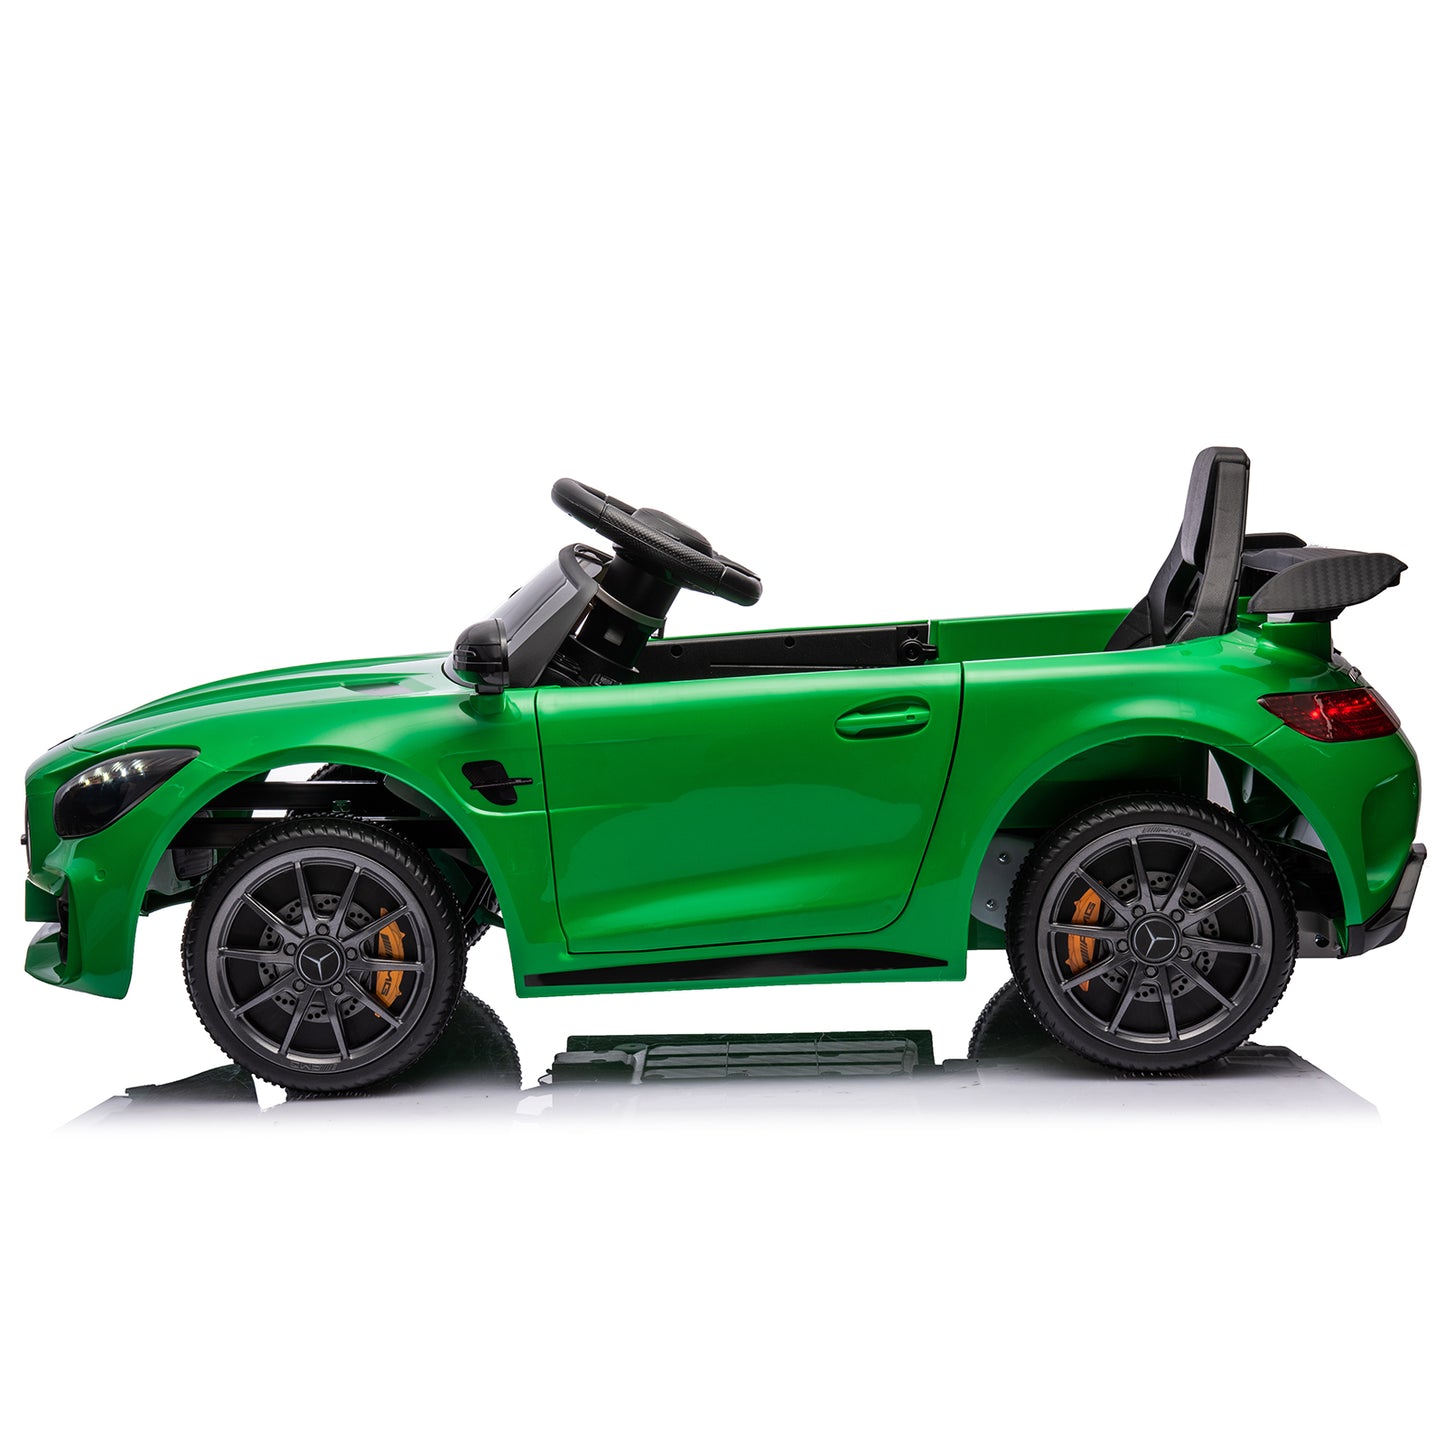 LEADZM Dual Drive 12V 4.5Ah with 2.4G Remote Control Mercedes-Benz Sports Car Green